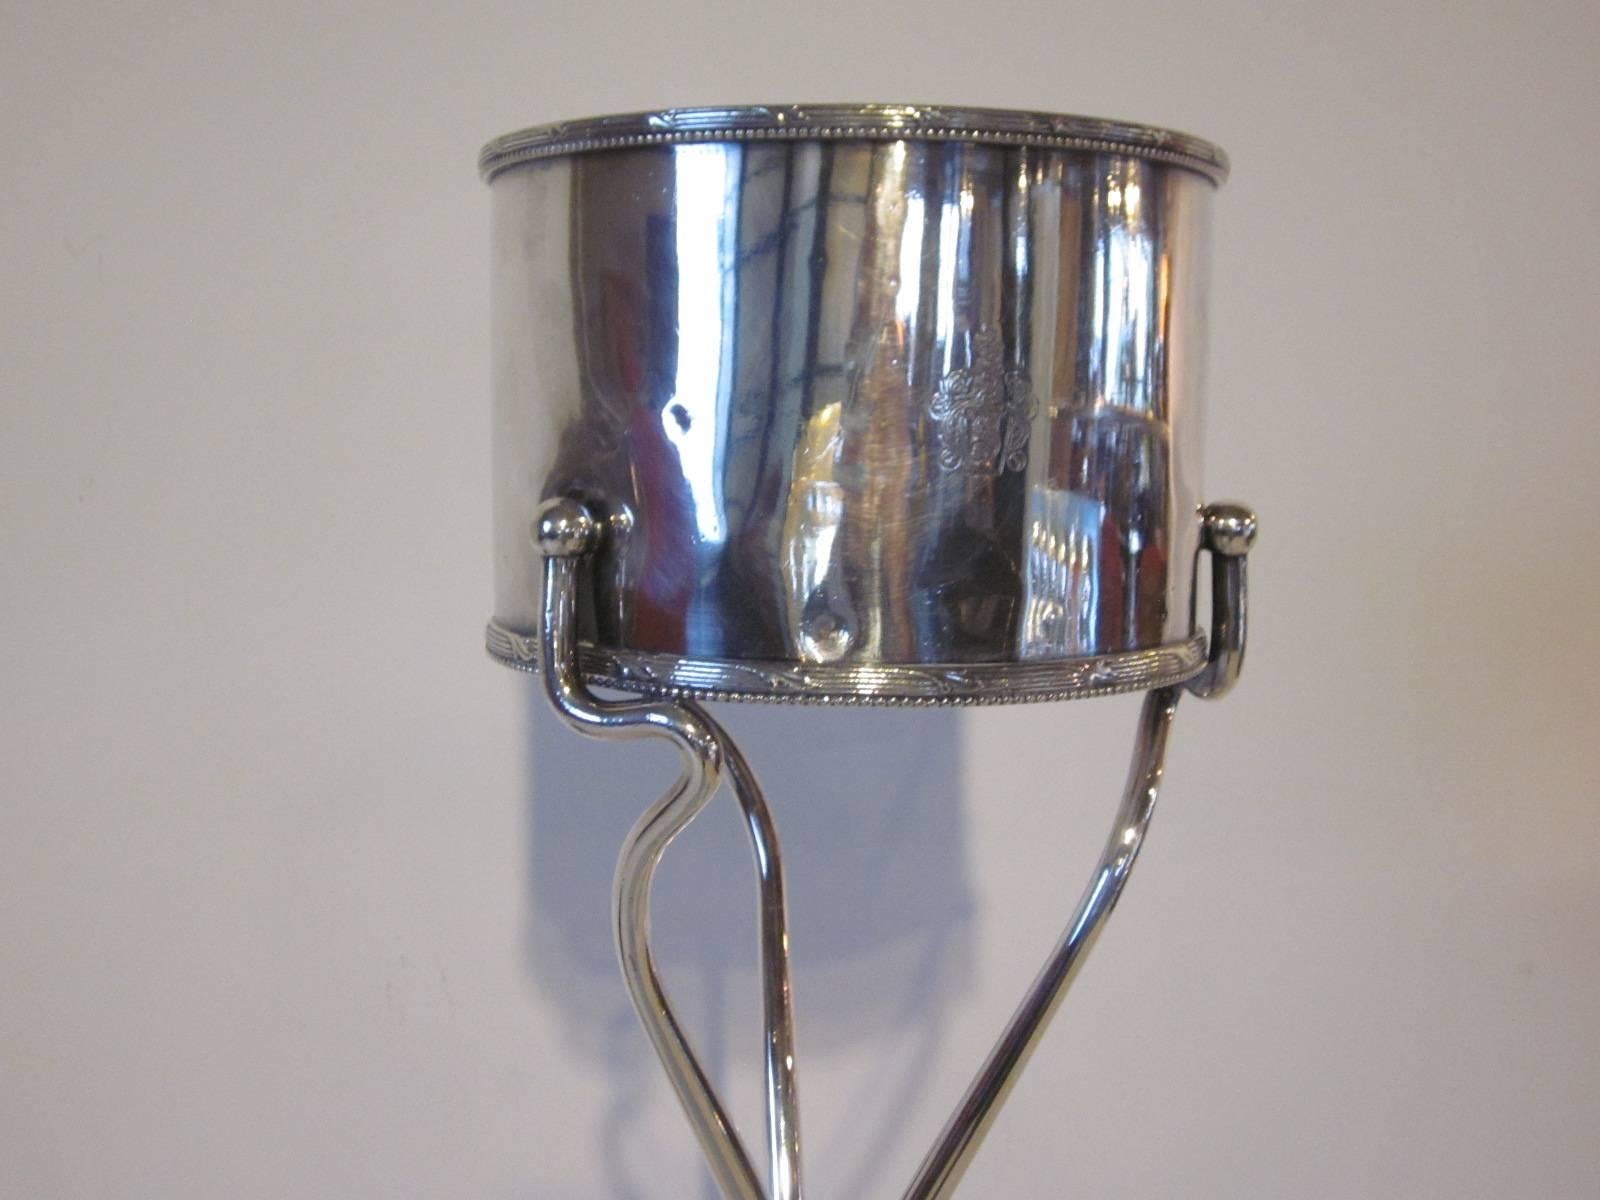 A one piece silver plated hotel ice bucket on a matching Stand in a mix of Mid-Century and classic design. Modern styled base with ball feet and simple bucket with some laurel designs to the top and bottom edge. Manufactures markings to the bucket